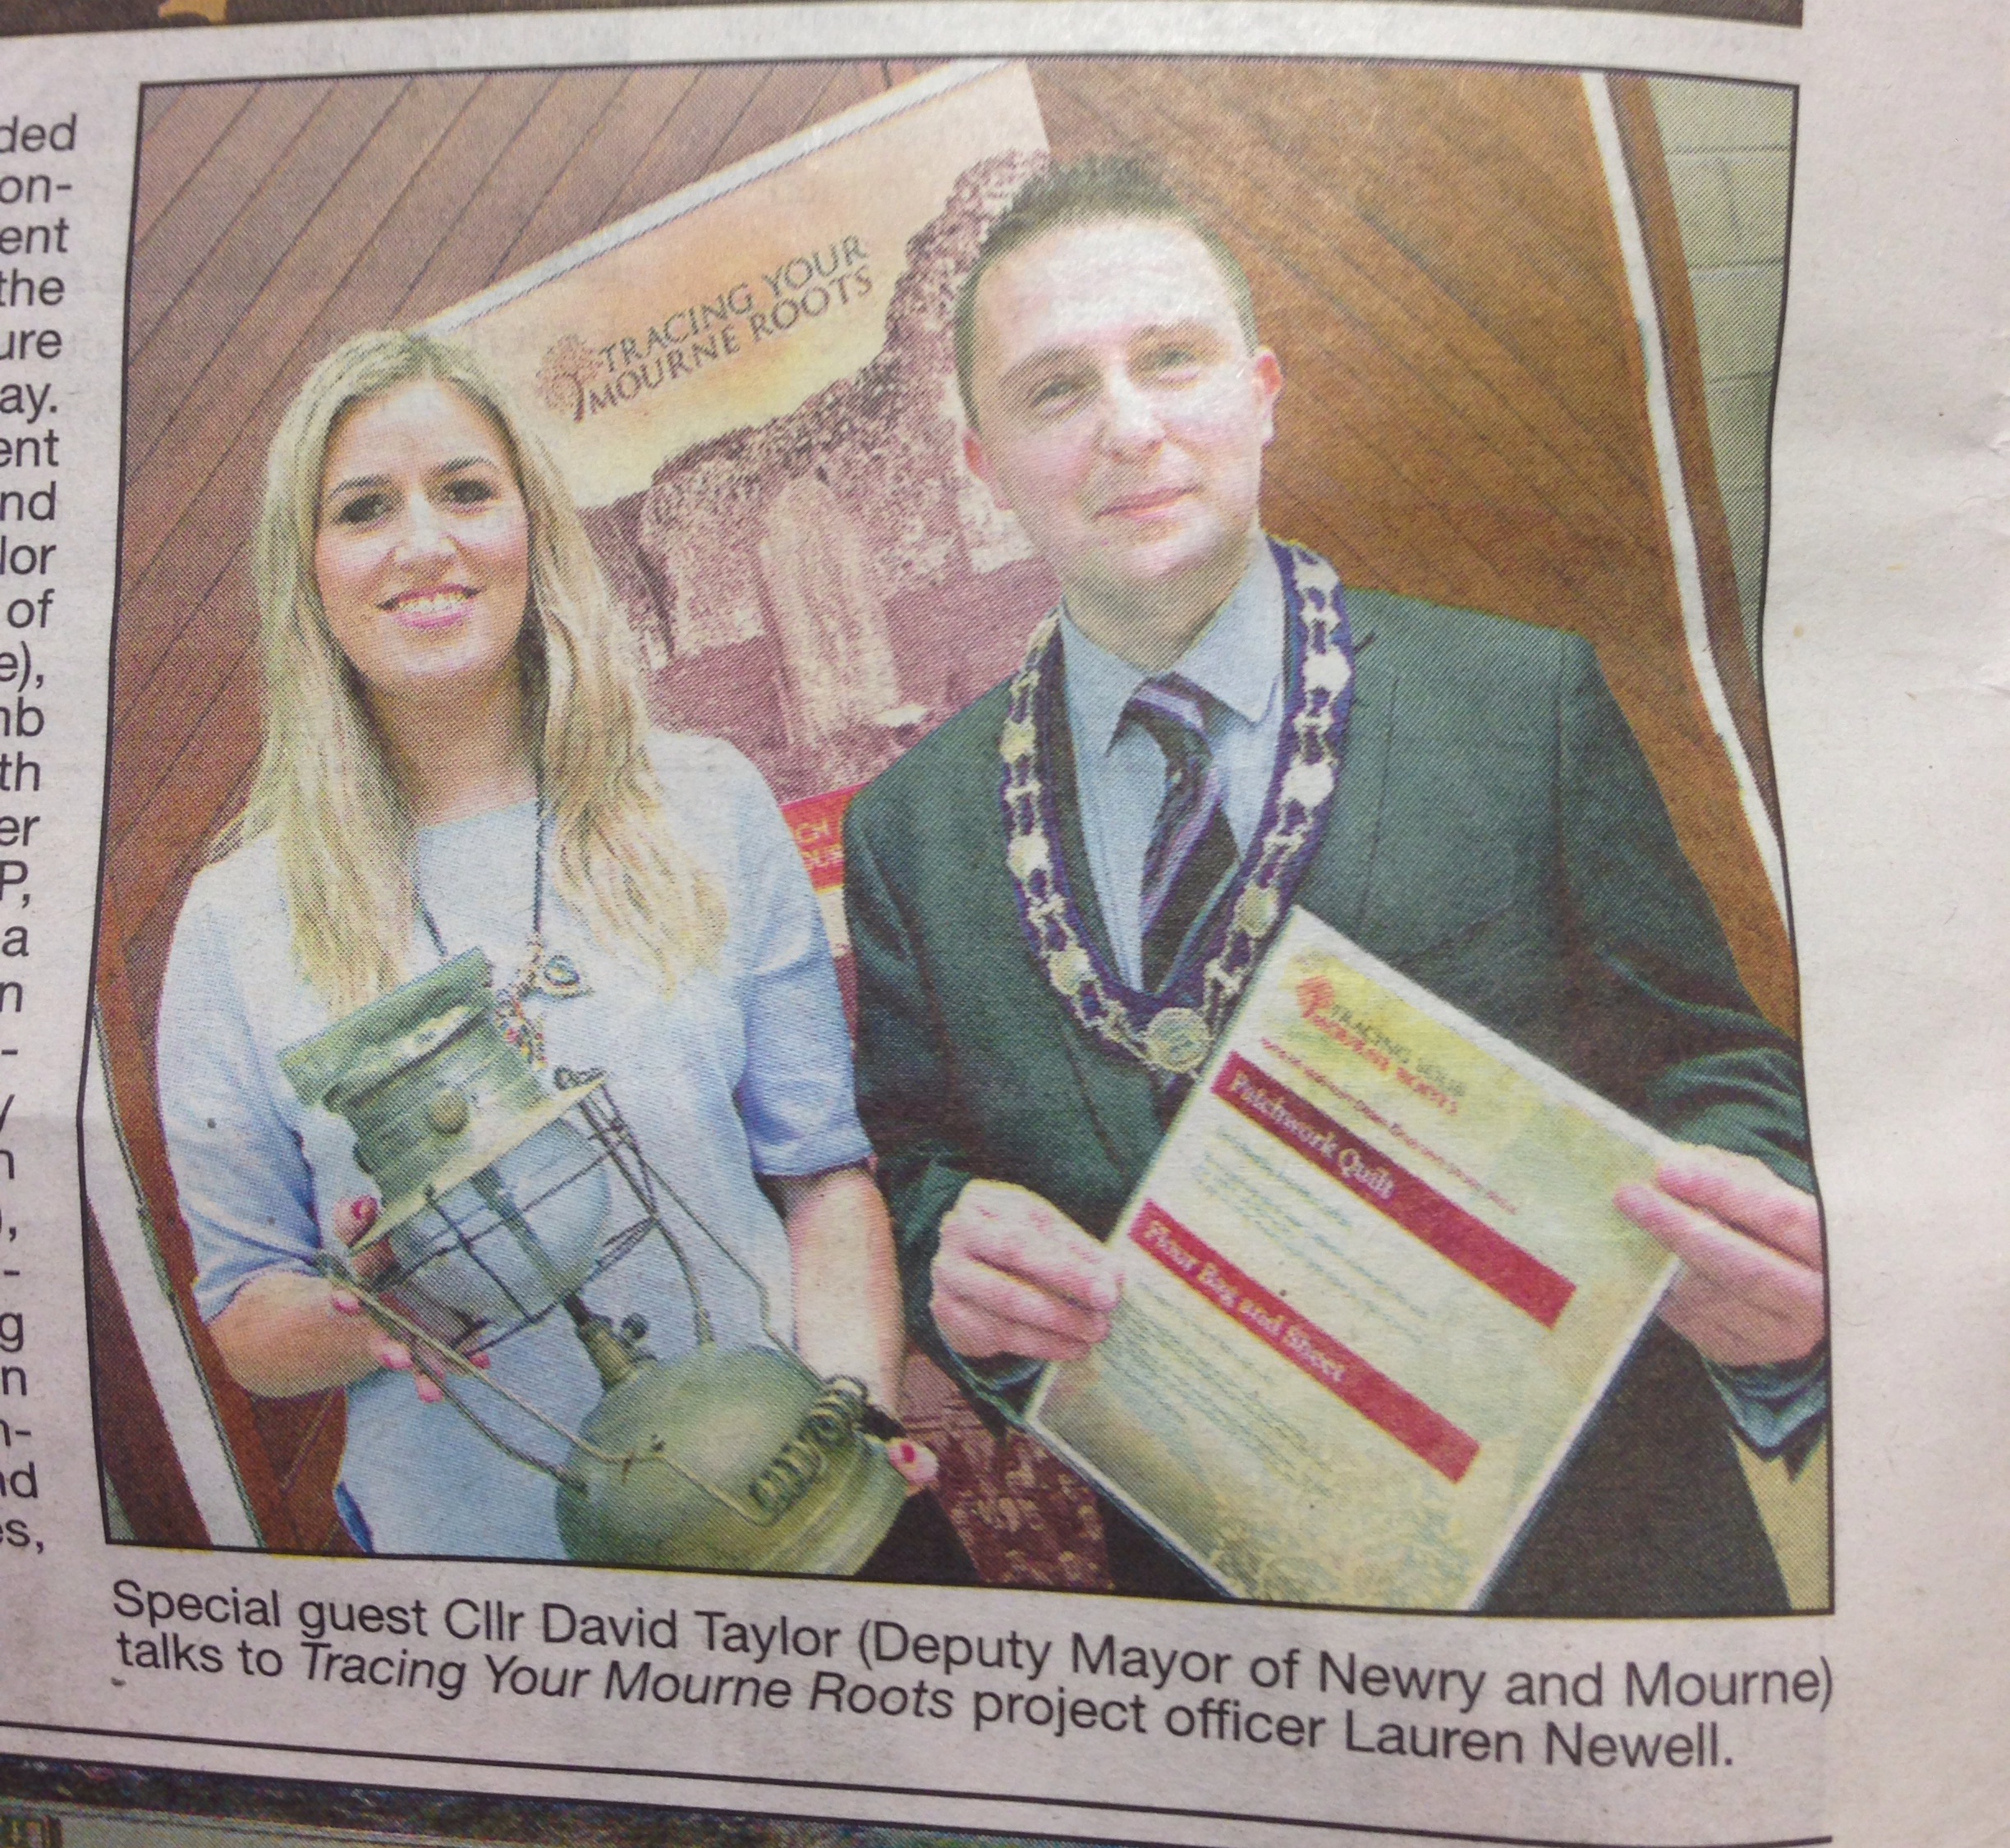 Article in Mourne Observer about event which TYMR attended and created a slideshow for in March 2014